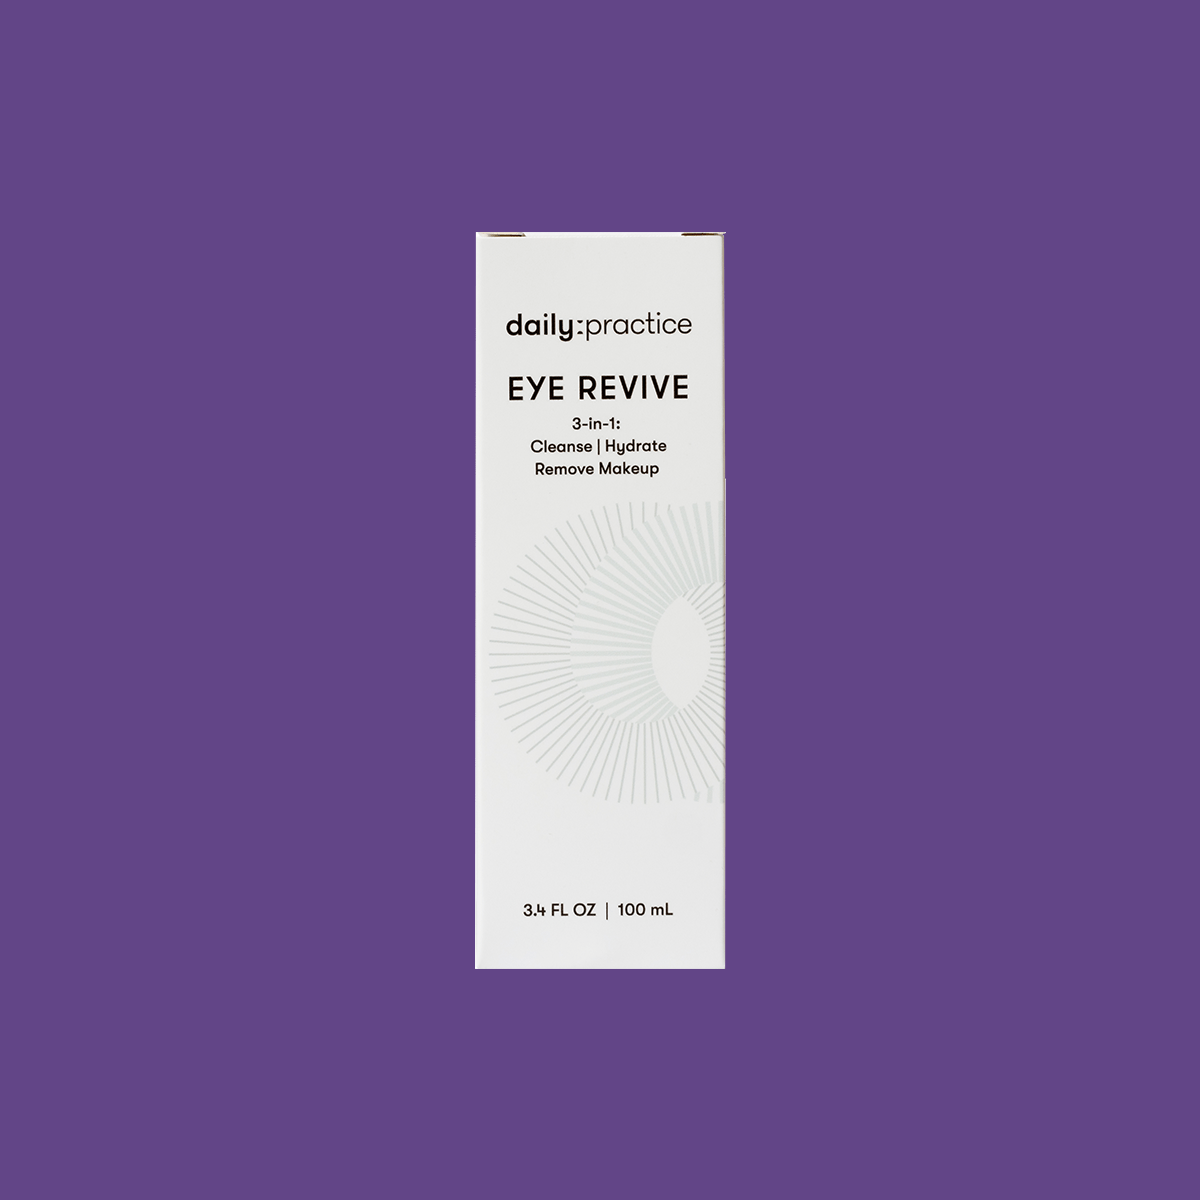 Daily Practice - Eye Revive Foam - 3-in-1 Eye Care Cleanser to Cleanse